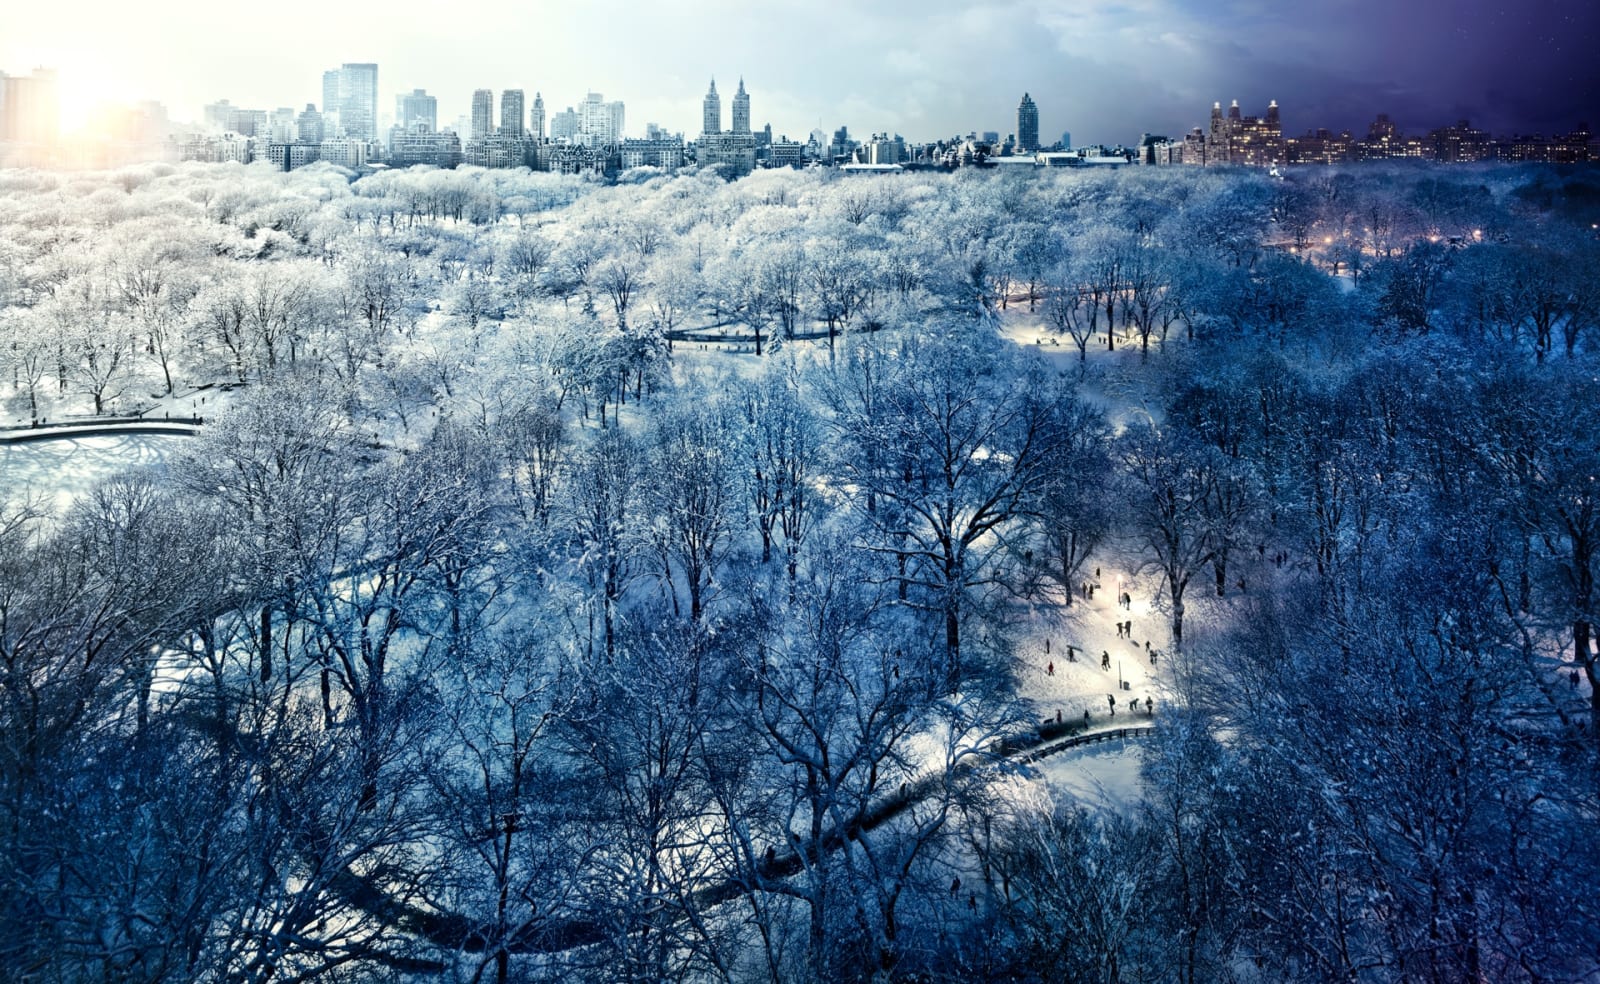 Stephen Wilkes, Central Park Snow, NYC, Day to Night™, 2010